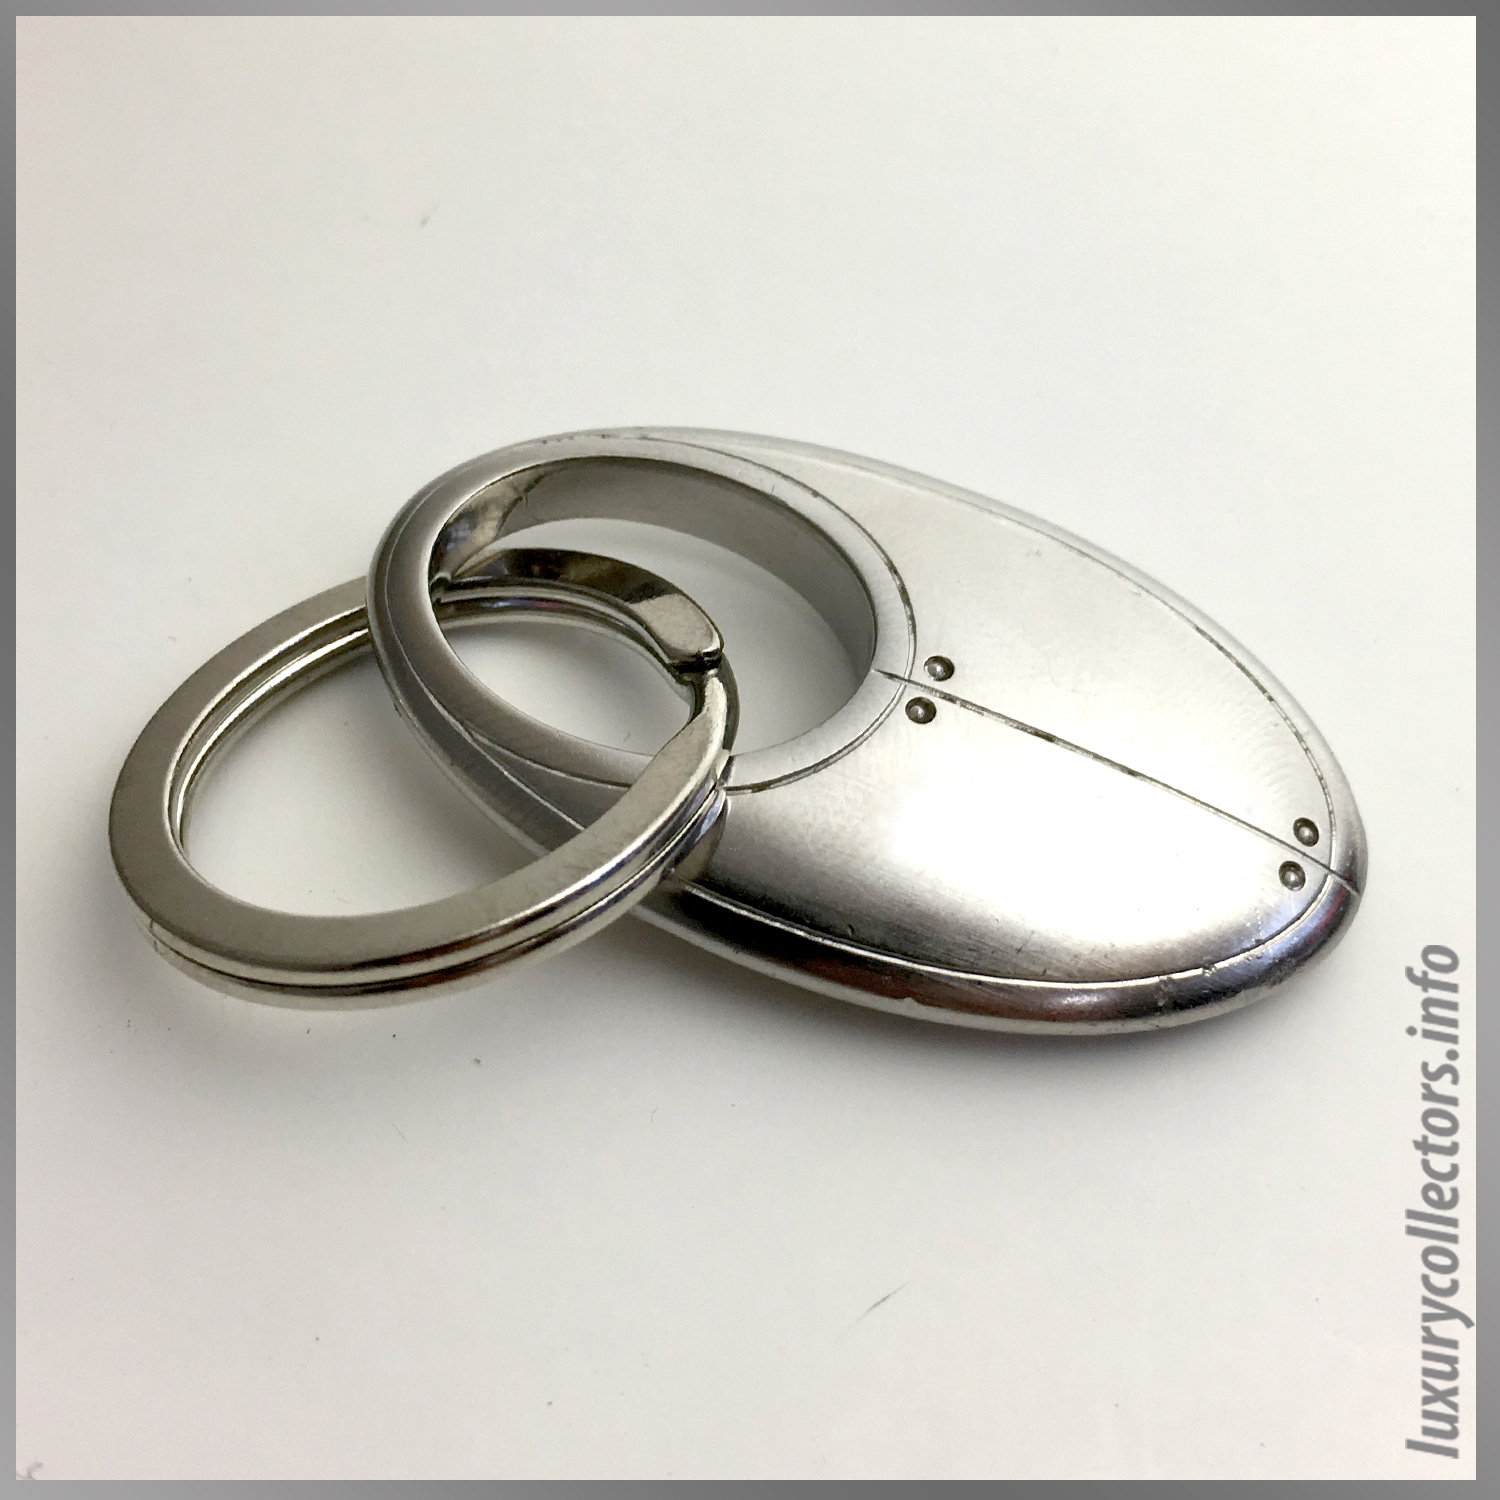 Tiffany & and Co. Streamerica Curviline Key Ring Chain keychain Oval Stainless Steel 1993 View